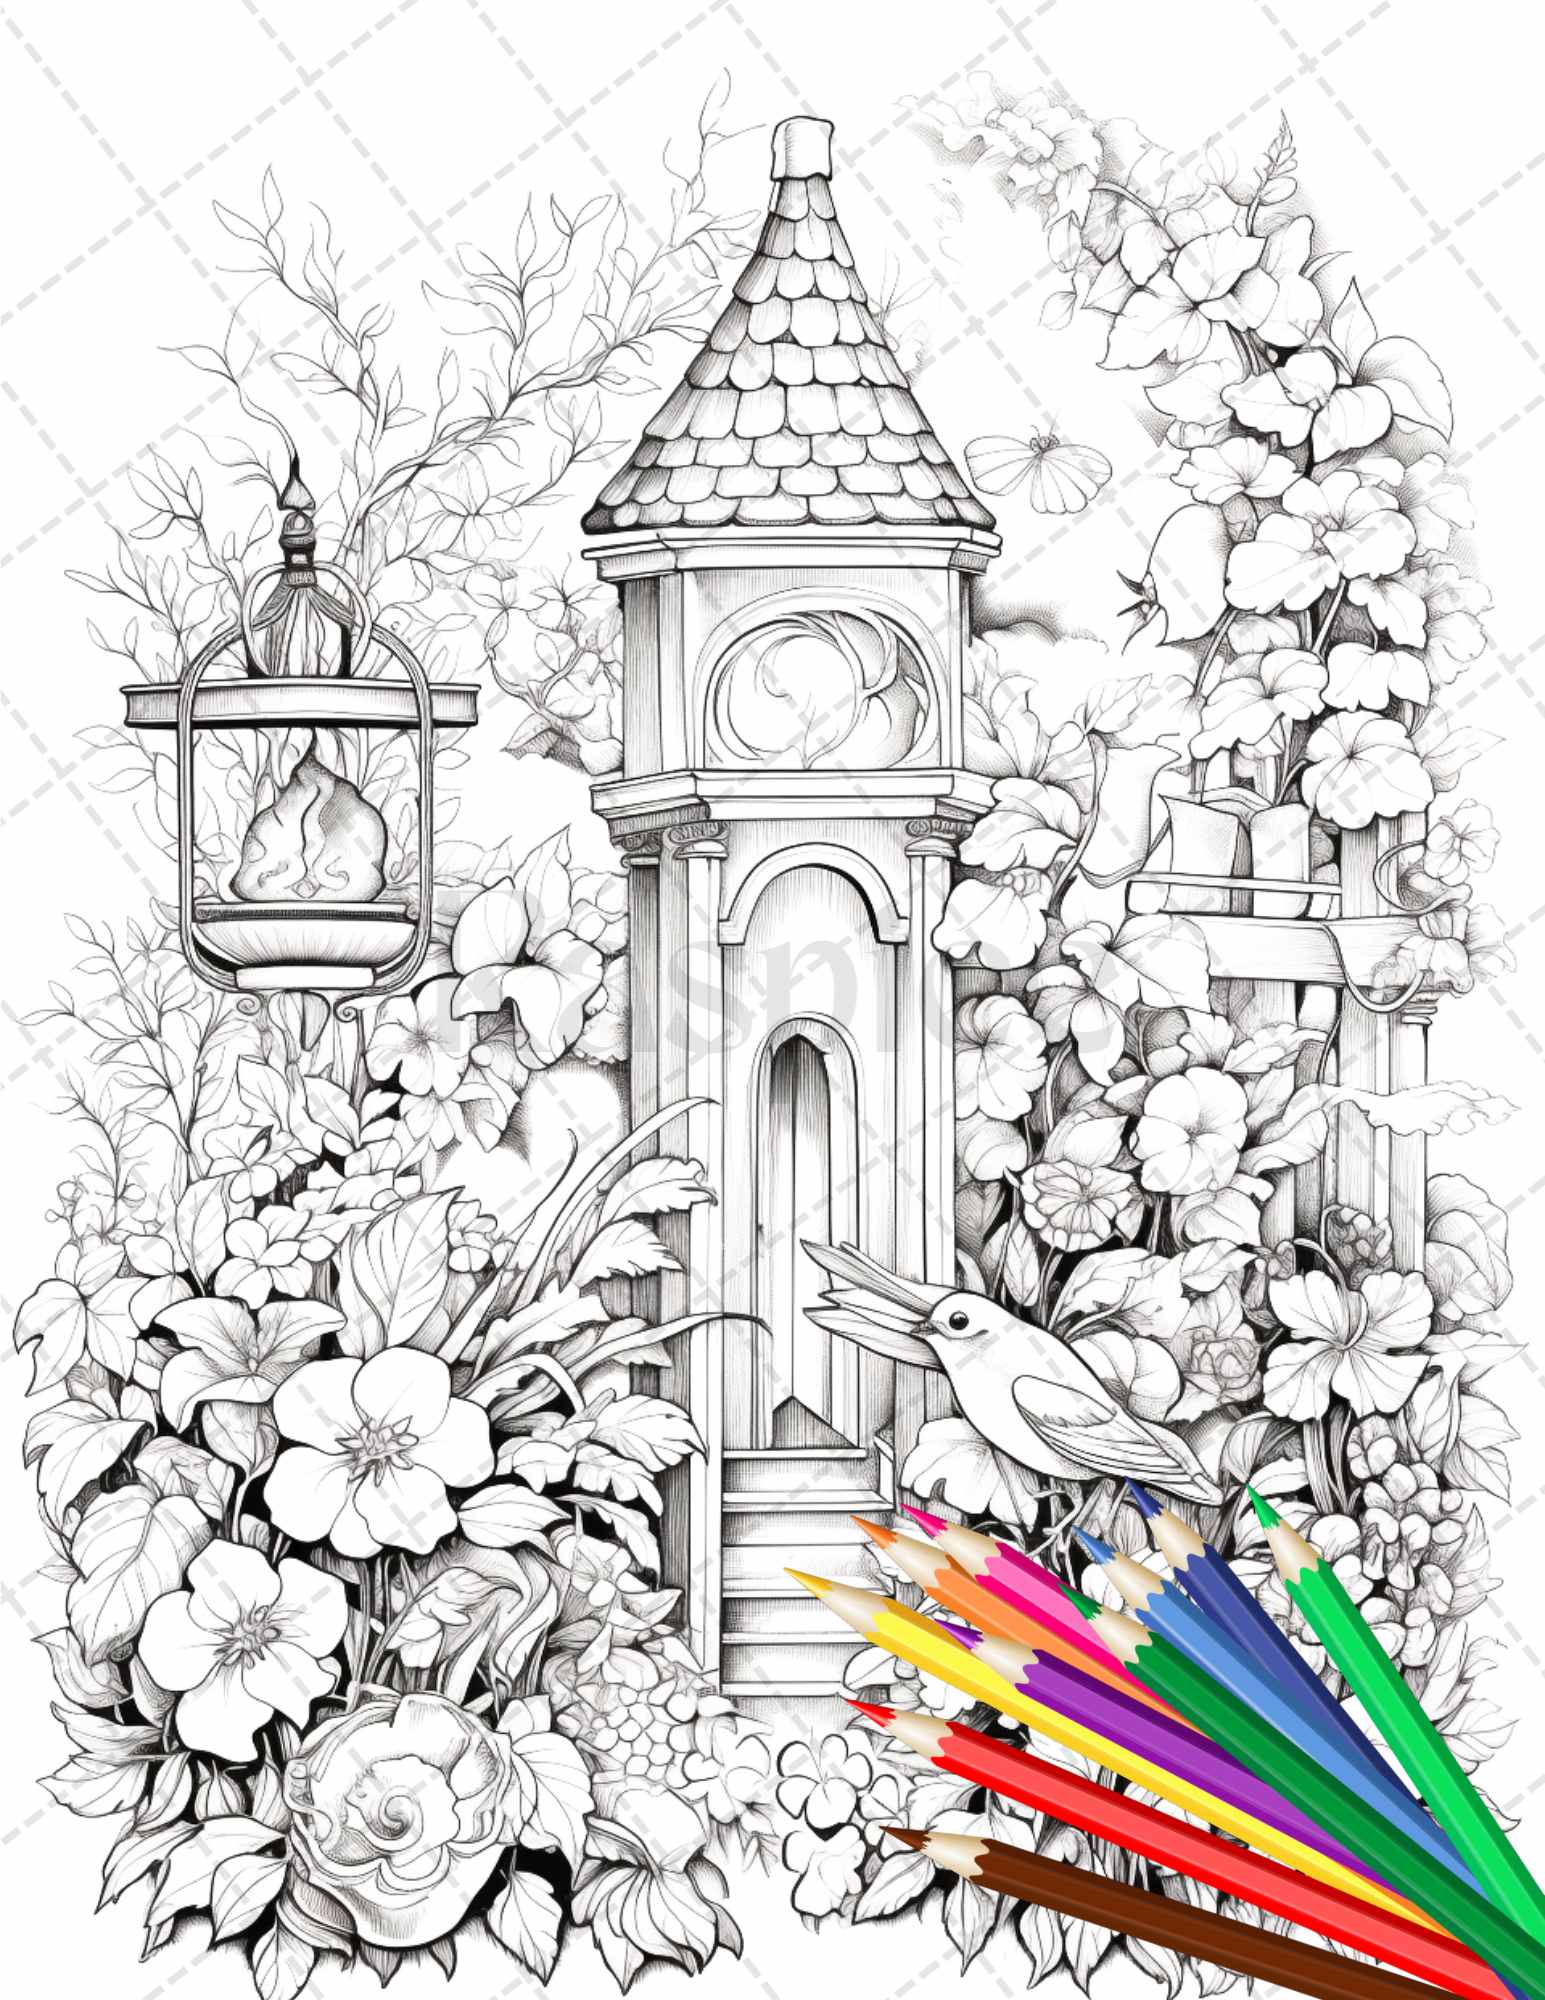 Secret garden coloring pages printable for adults grayscale coloring â coloring